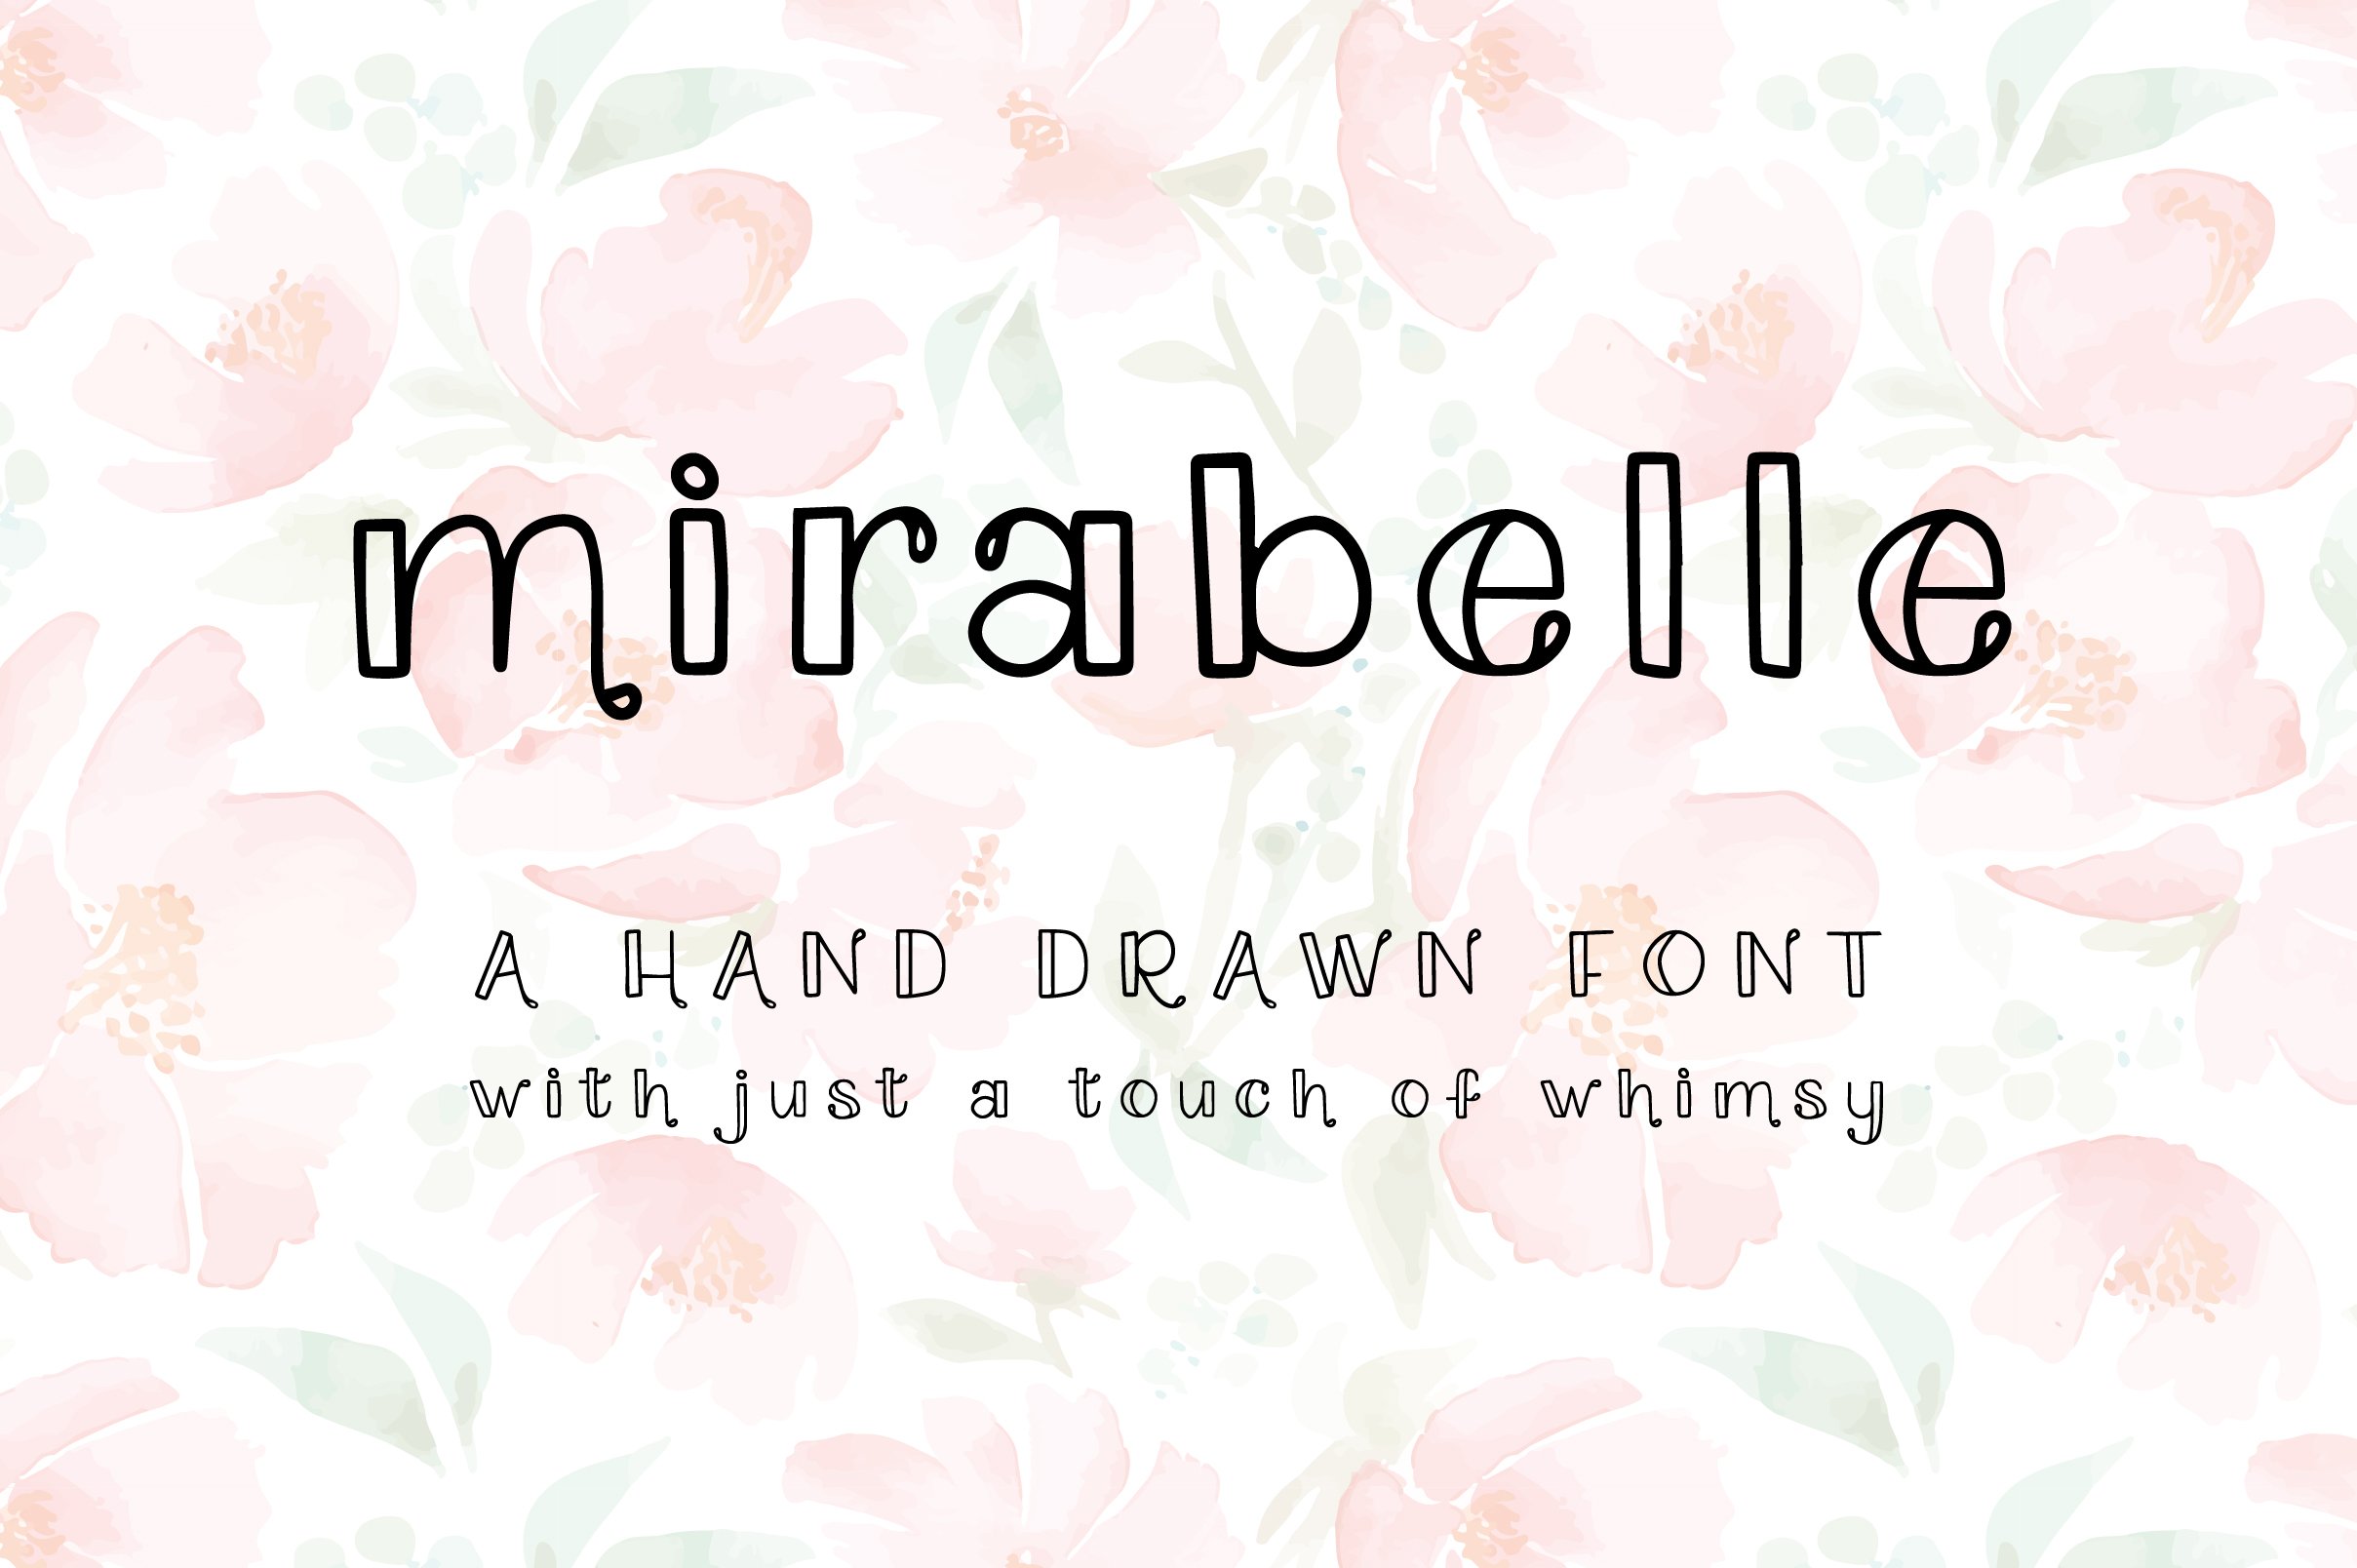 Mirabelle: A Hand Drawn Font cover image.